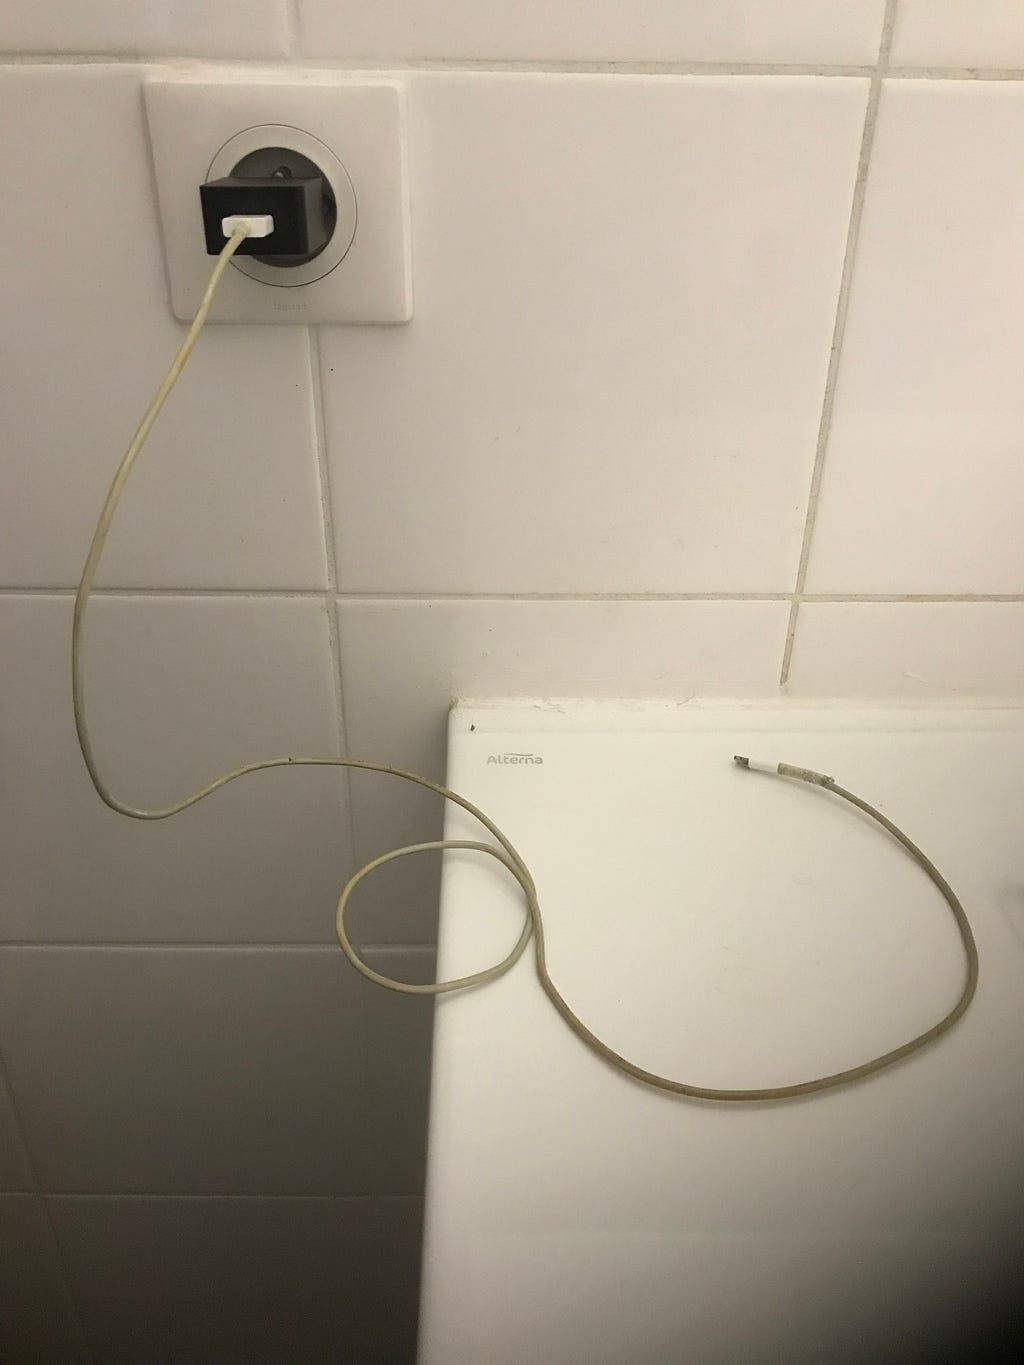 Charger without a connected device